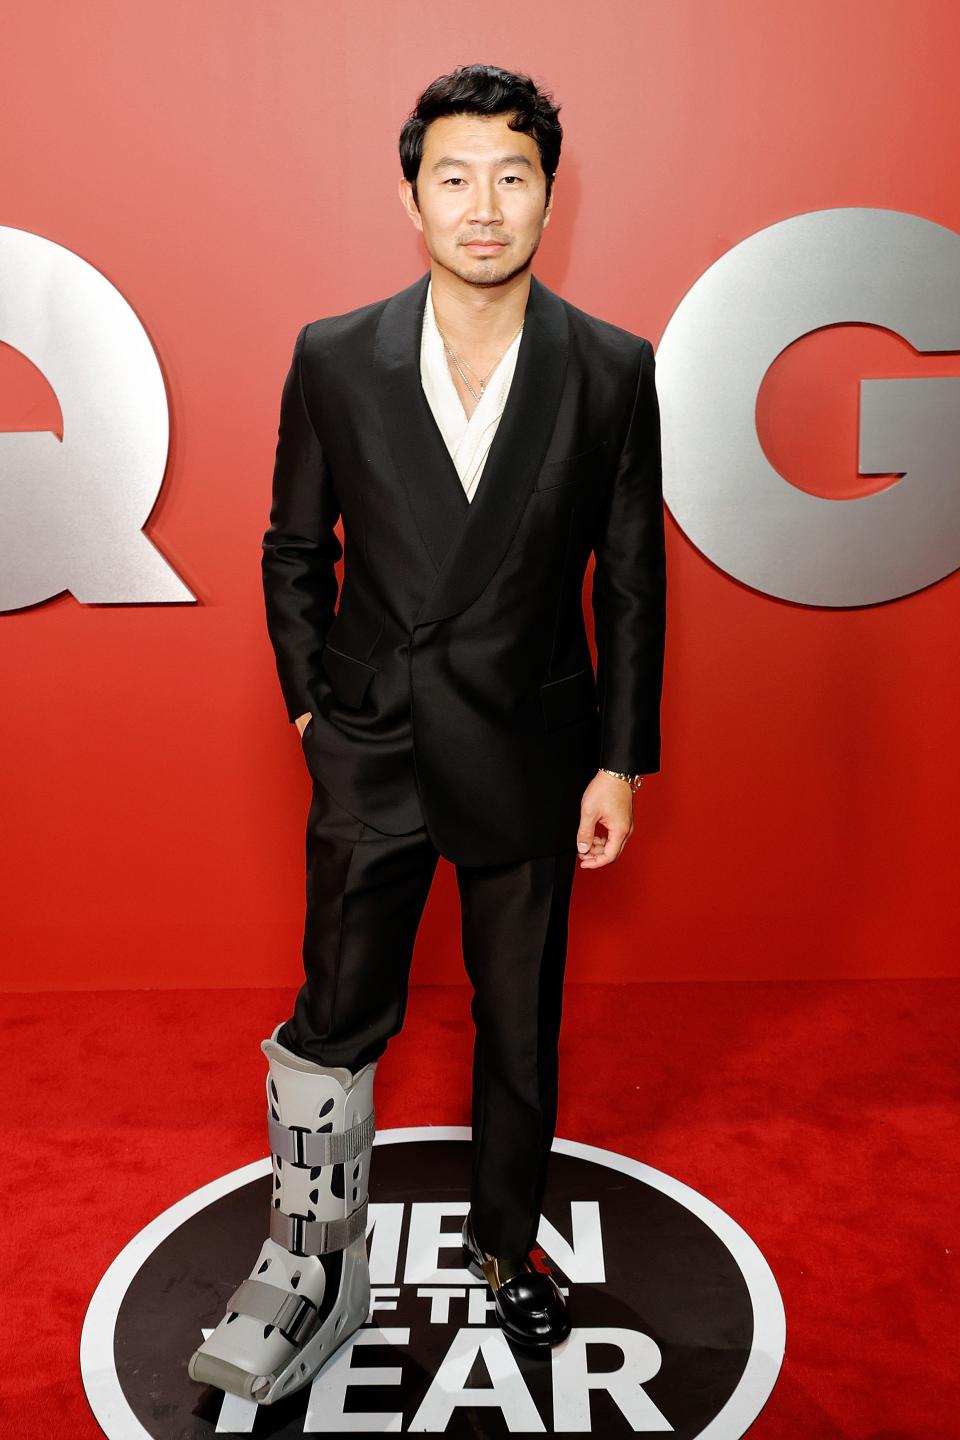 People's Choice Awards host Simu Liu tore his Achilles tendon last October while on vacation with friends.